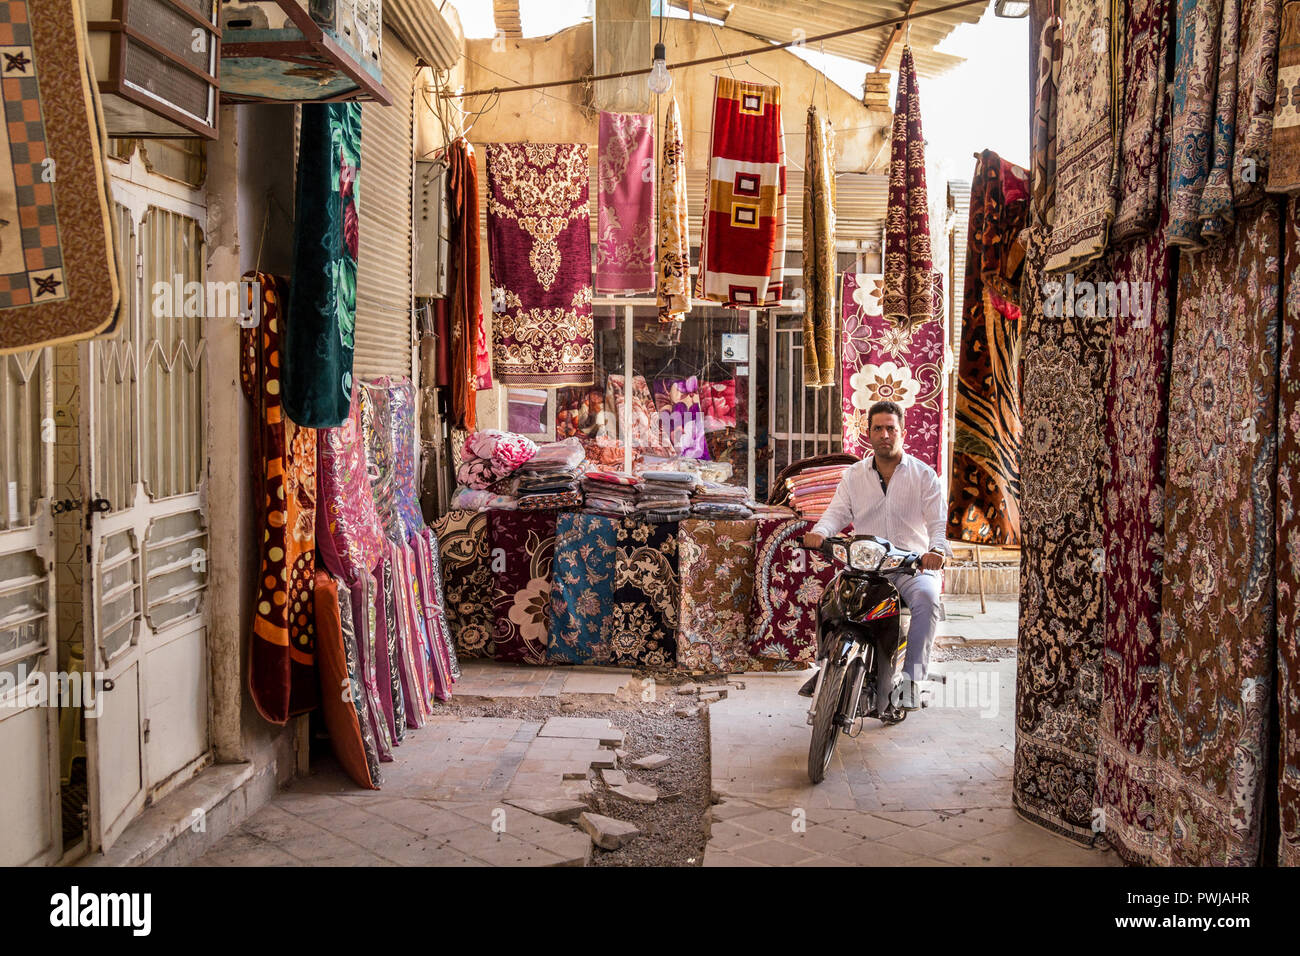 YAZD, IRAN - AUGUST 18, 2015: Man driving a motorcycle surrounded by stores selling carpets & rugs in Yazd Khan bazaar. Yazd is one of the main cities Stock Photo